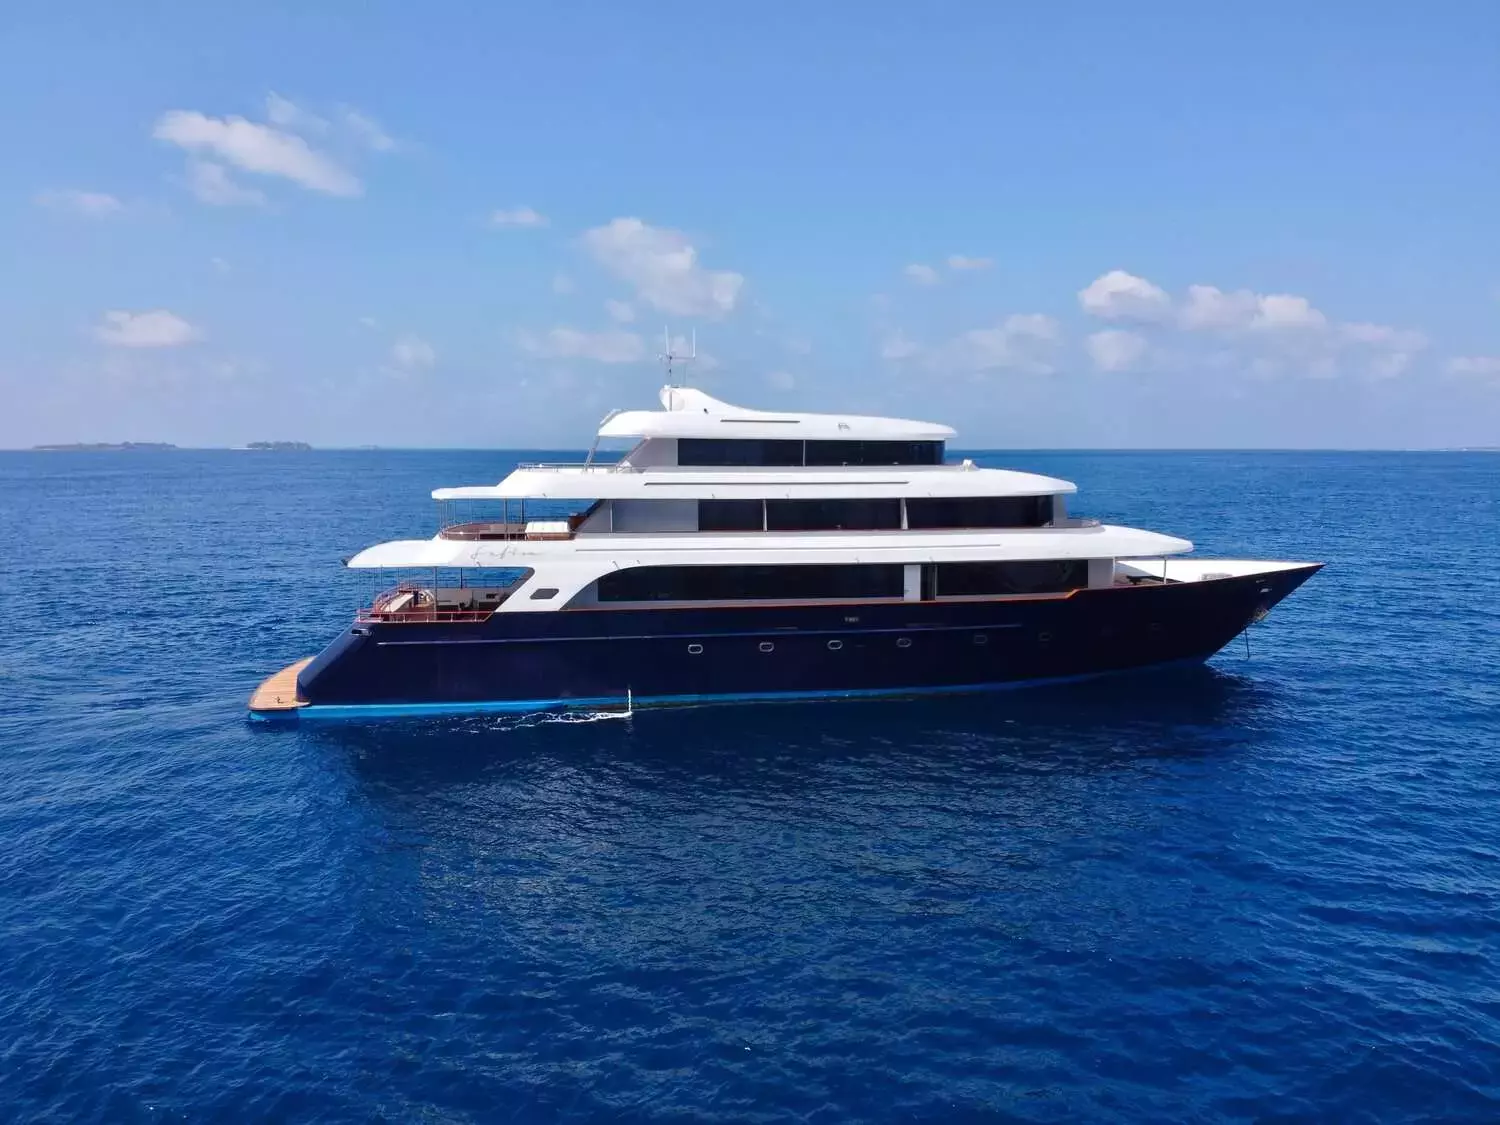 Safira by Custom Made - Top rates for a Charter of a private Superyacht in Mauritius